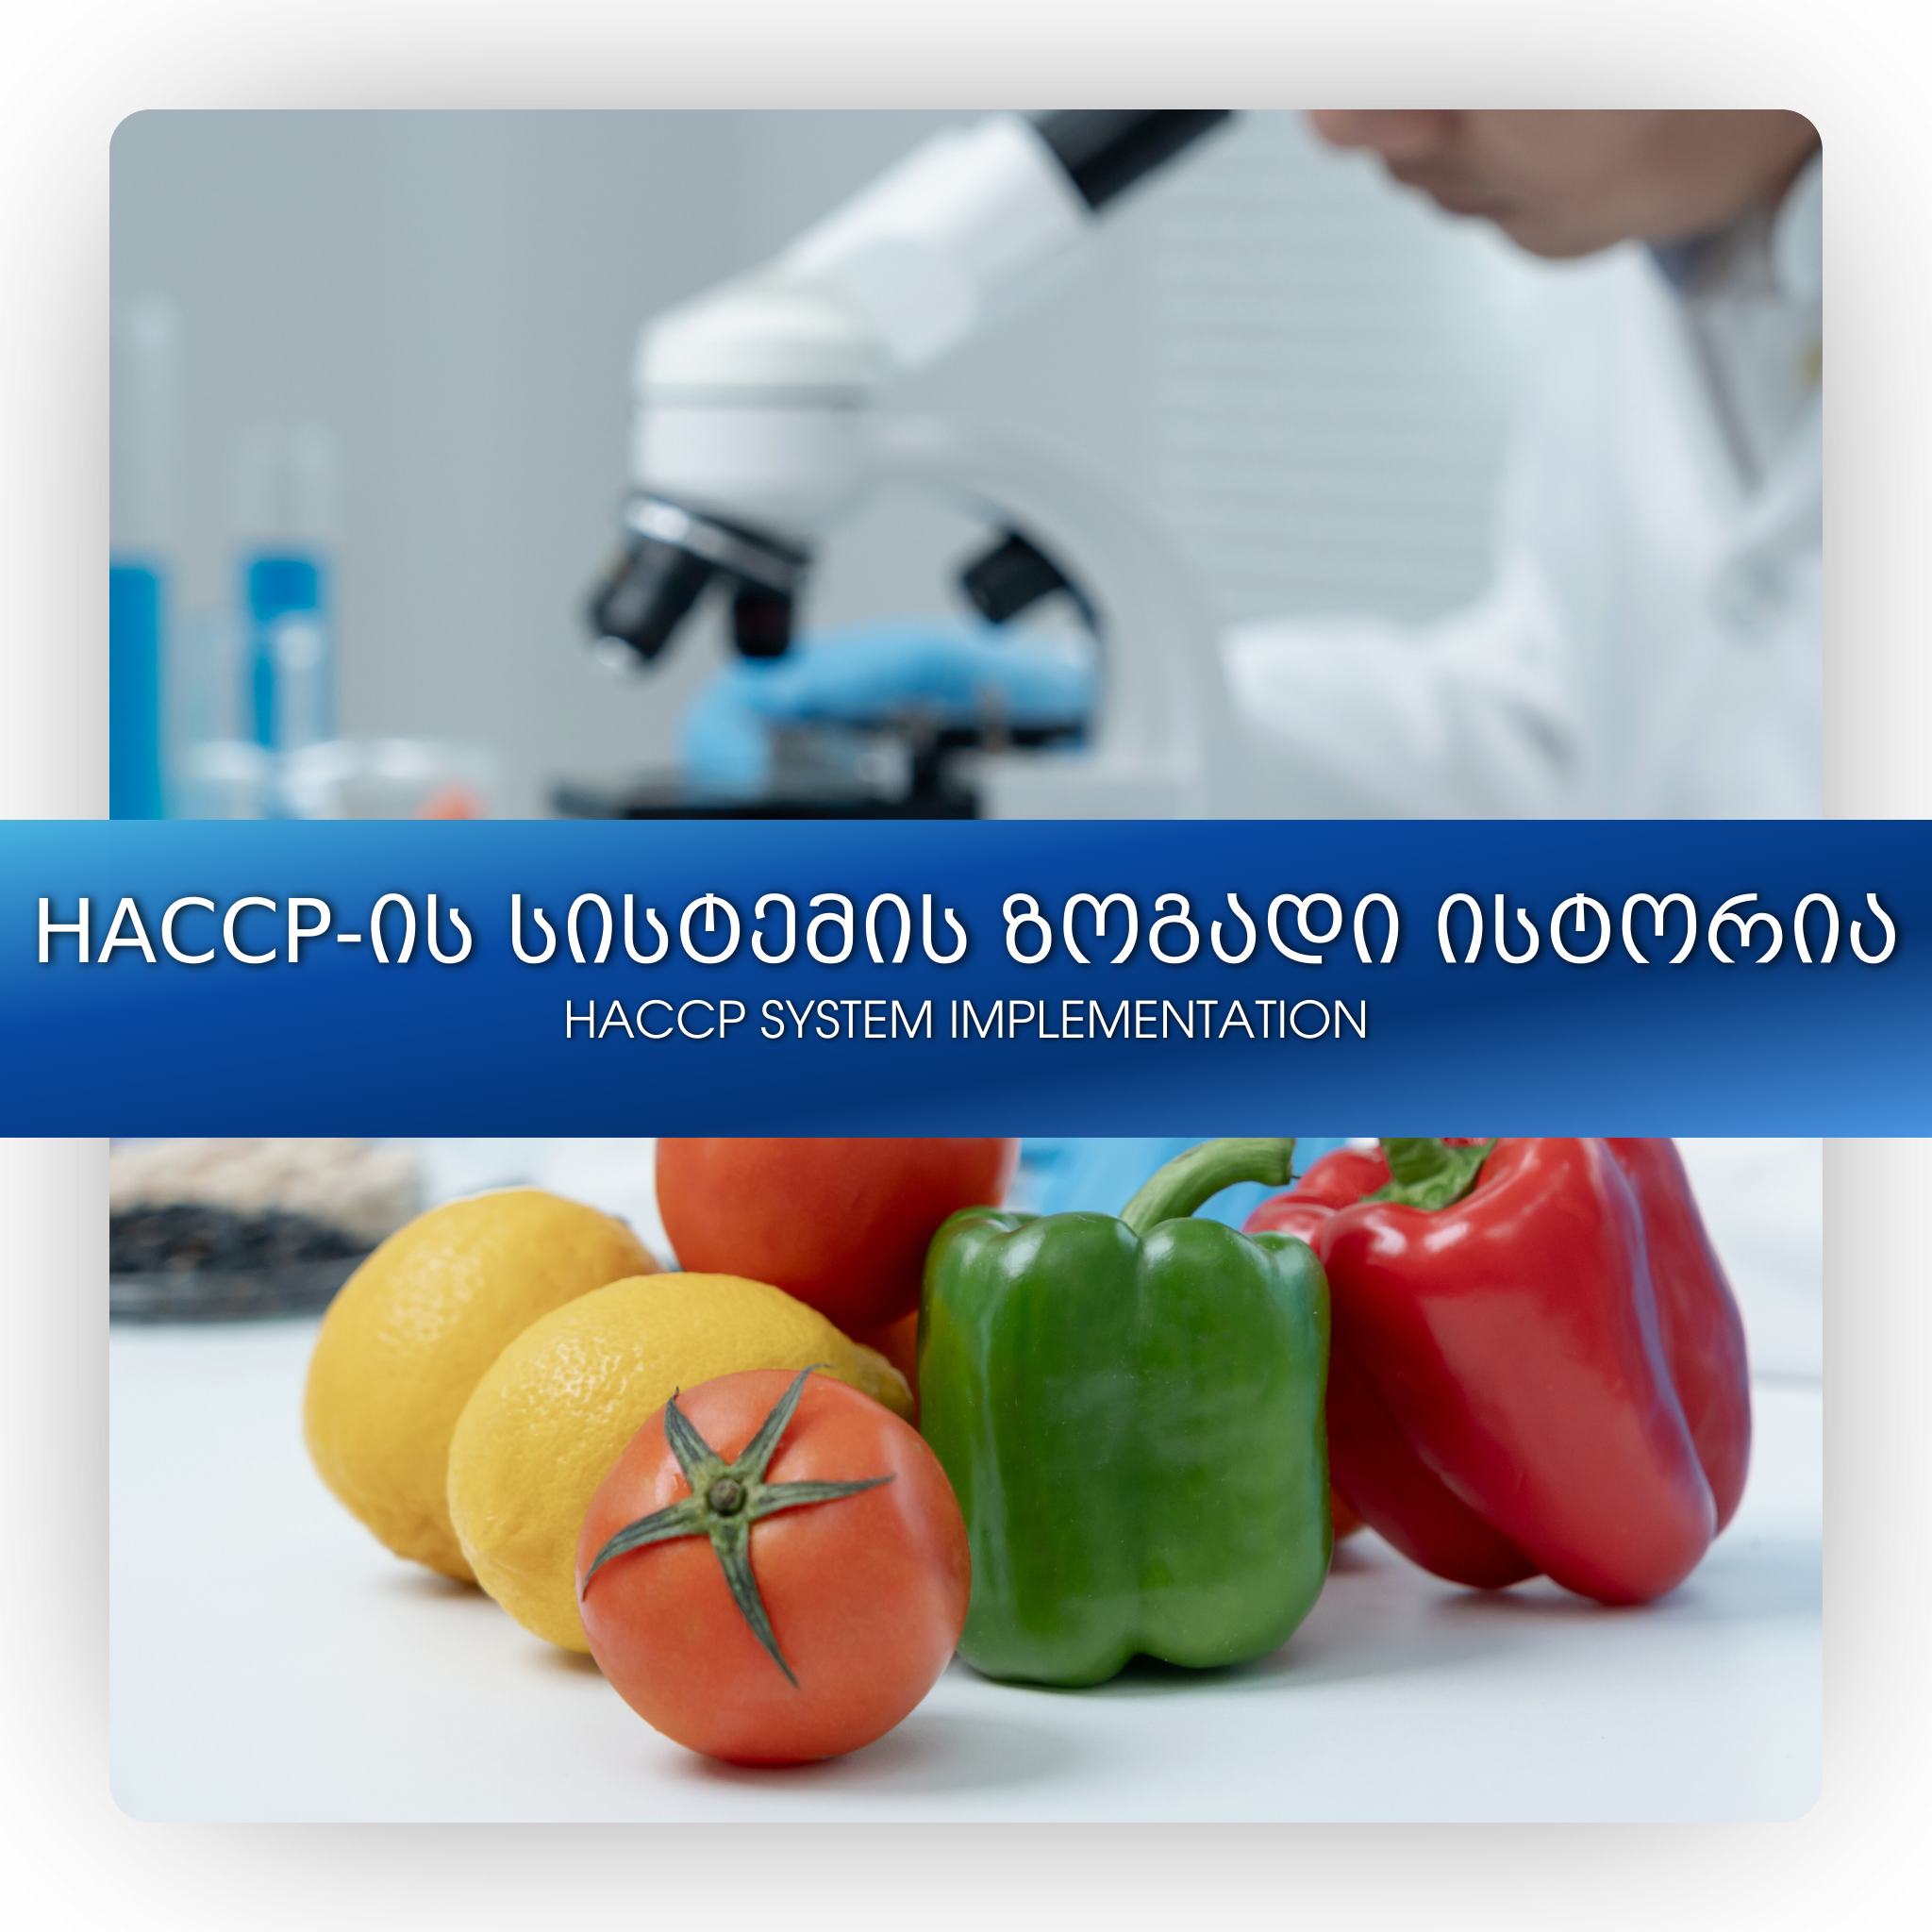 HACCP System Implementation